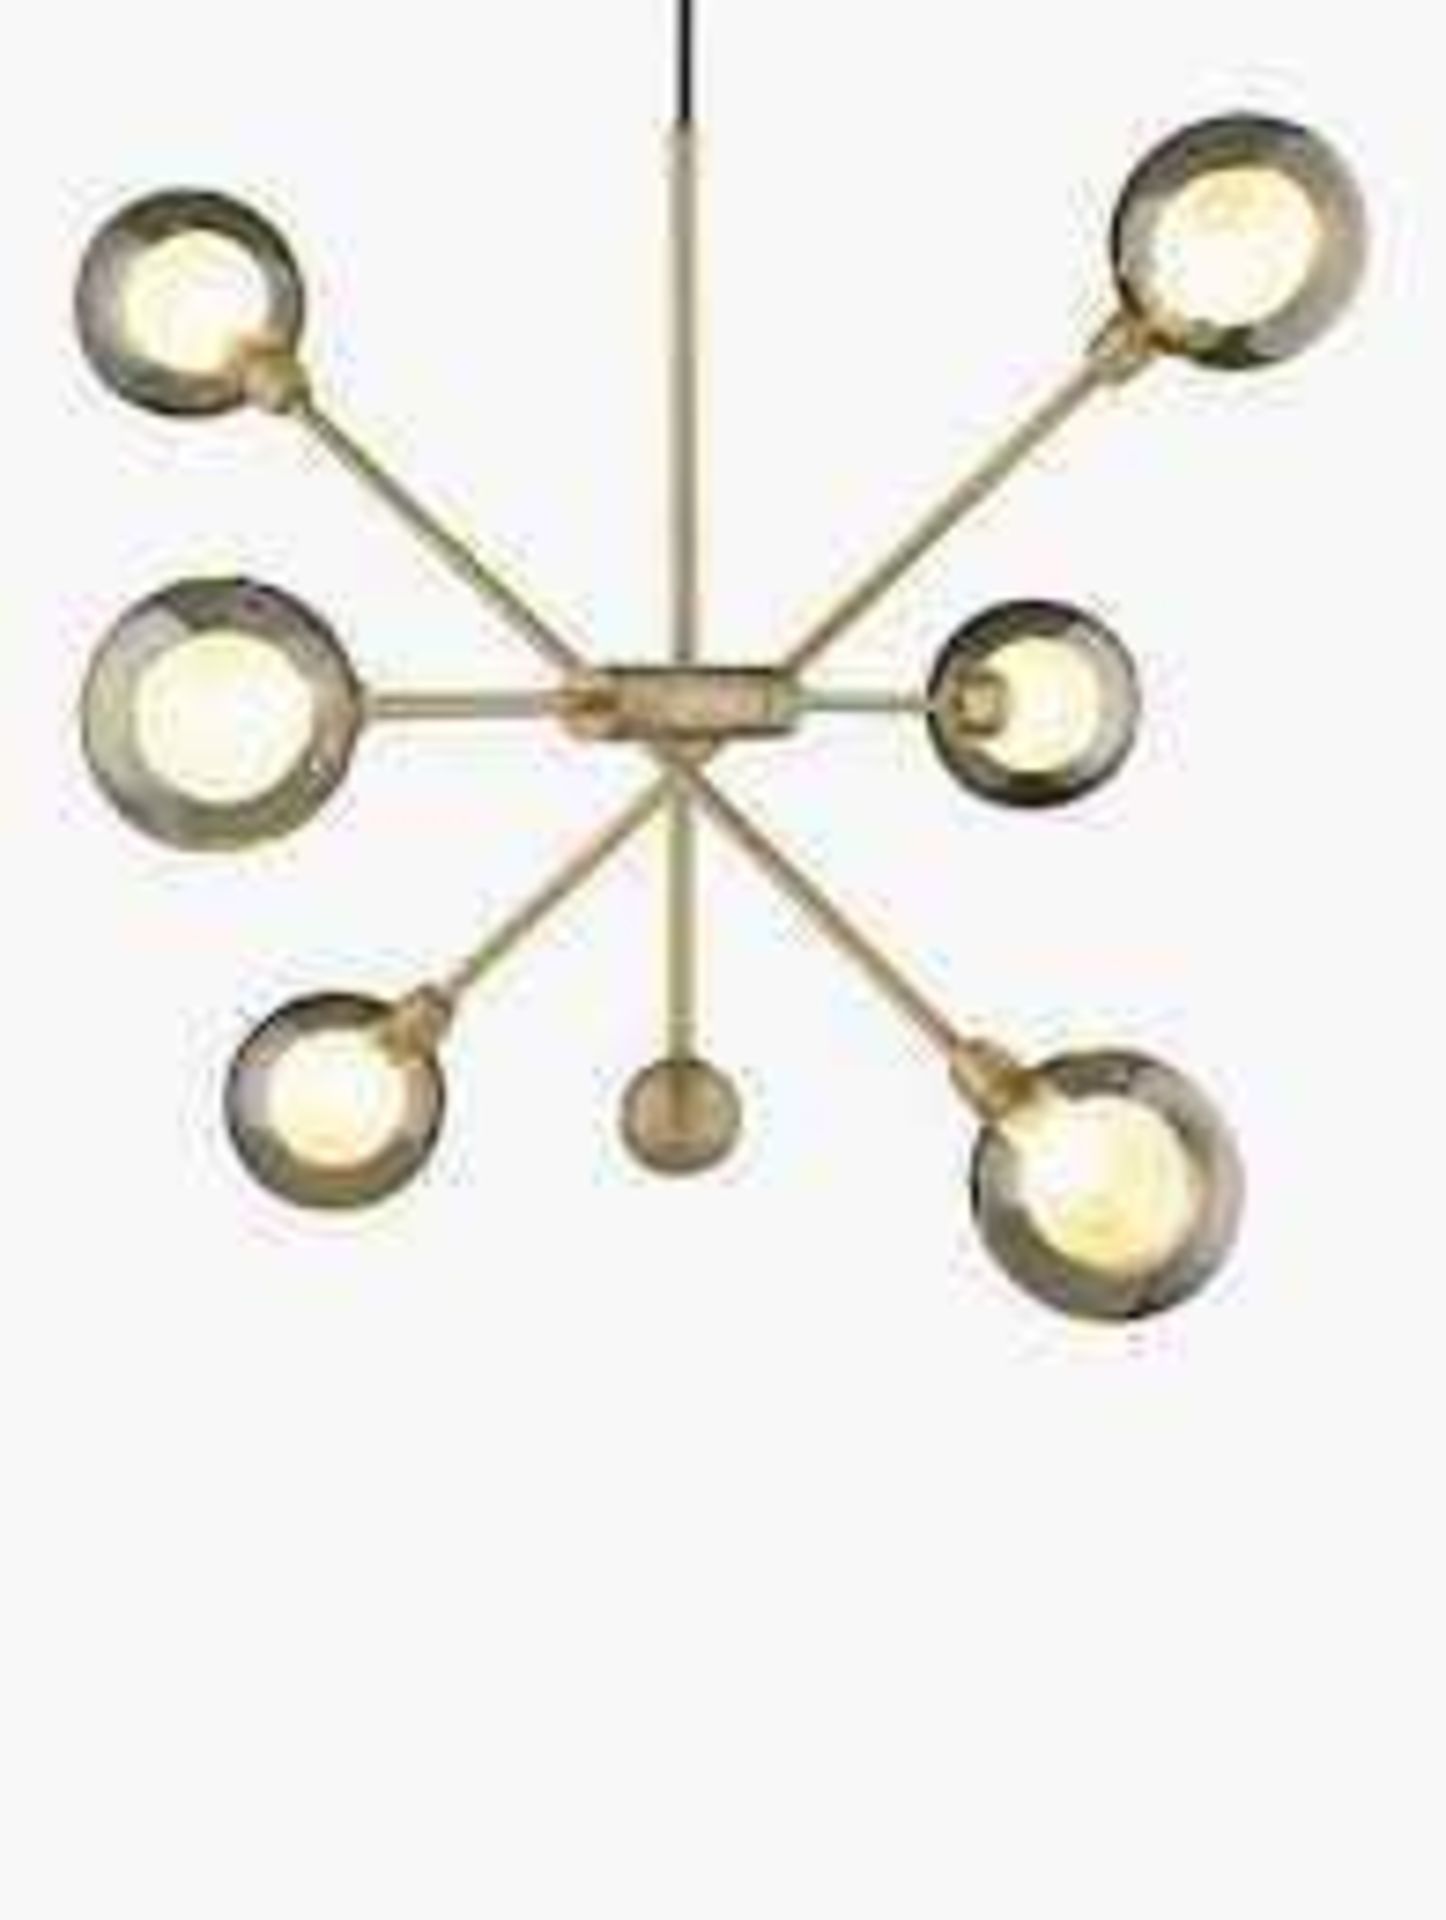 RRP £210 Boxed John Lewis And Partner Huxley 6 Light Ceiling Light Fitting 6.260 (Appraisals